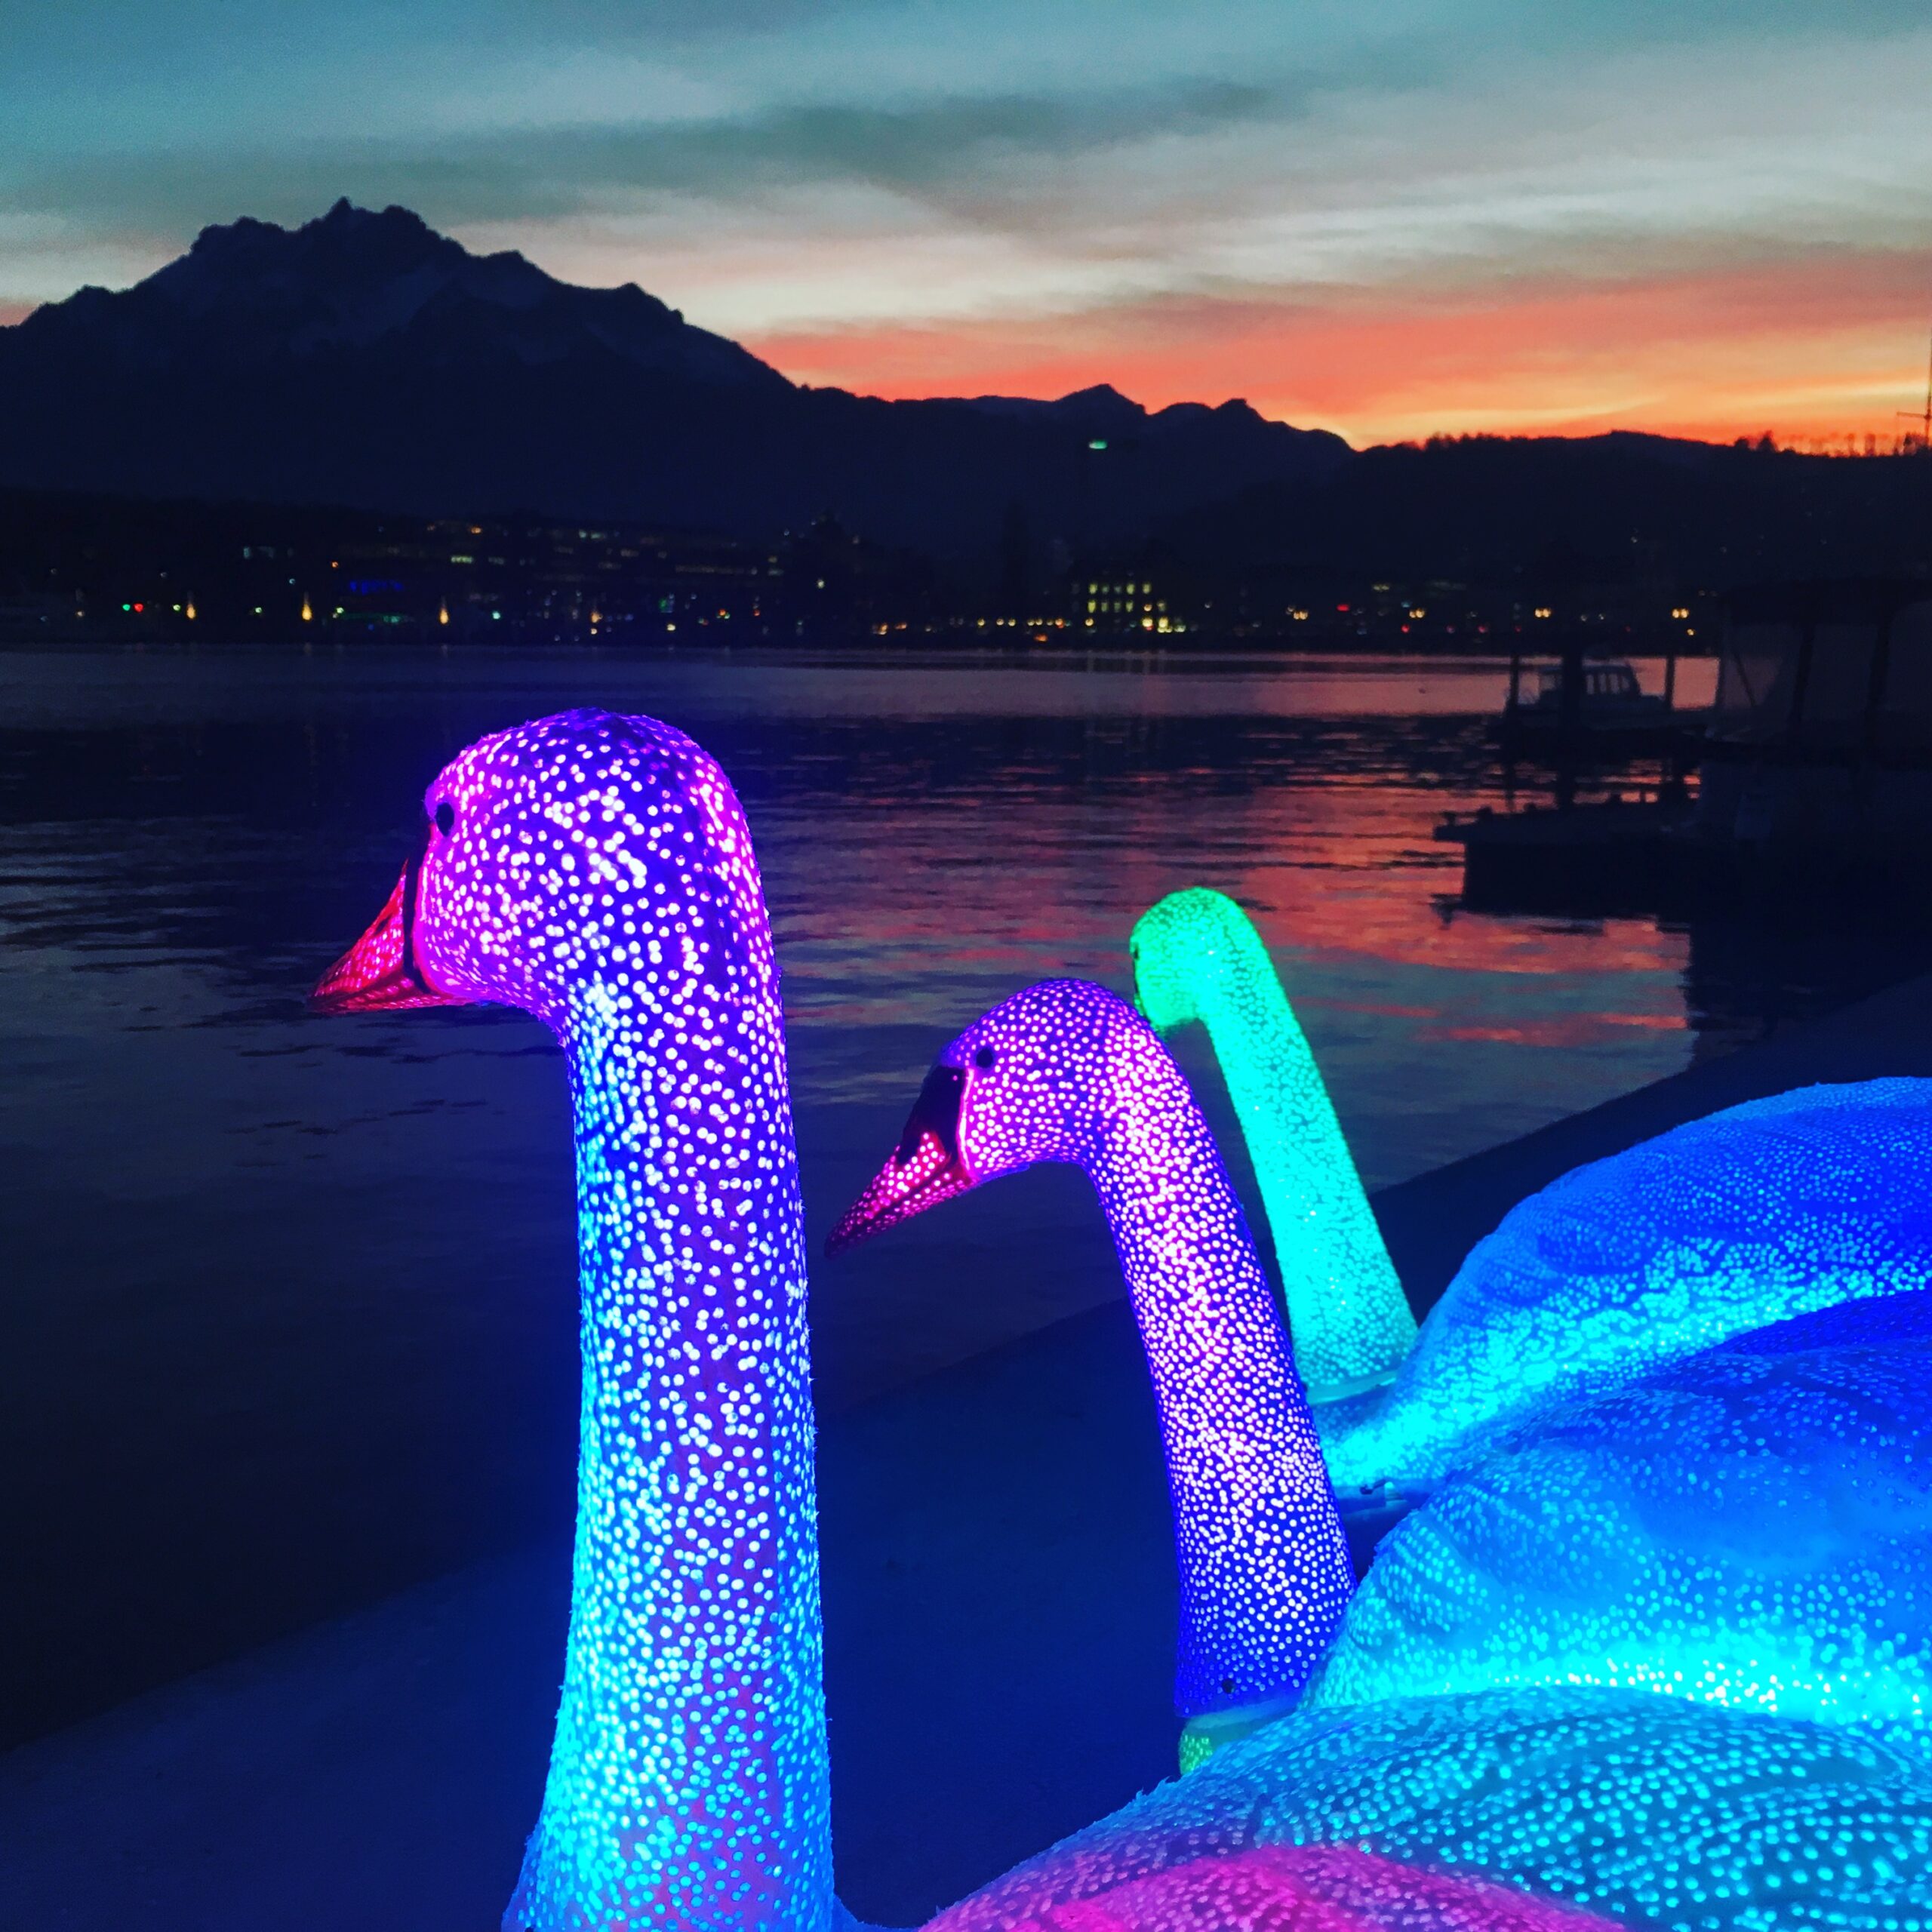 An image of three fibreglass swans on a lake. They are lit from inside in purple and blue. There are mountains and a sunset in the background. 